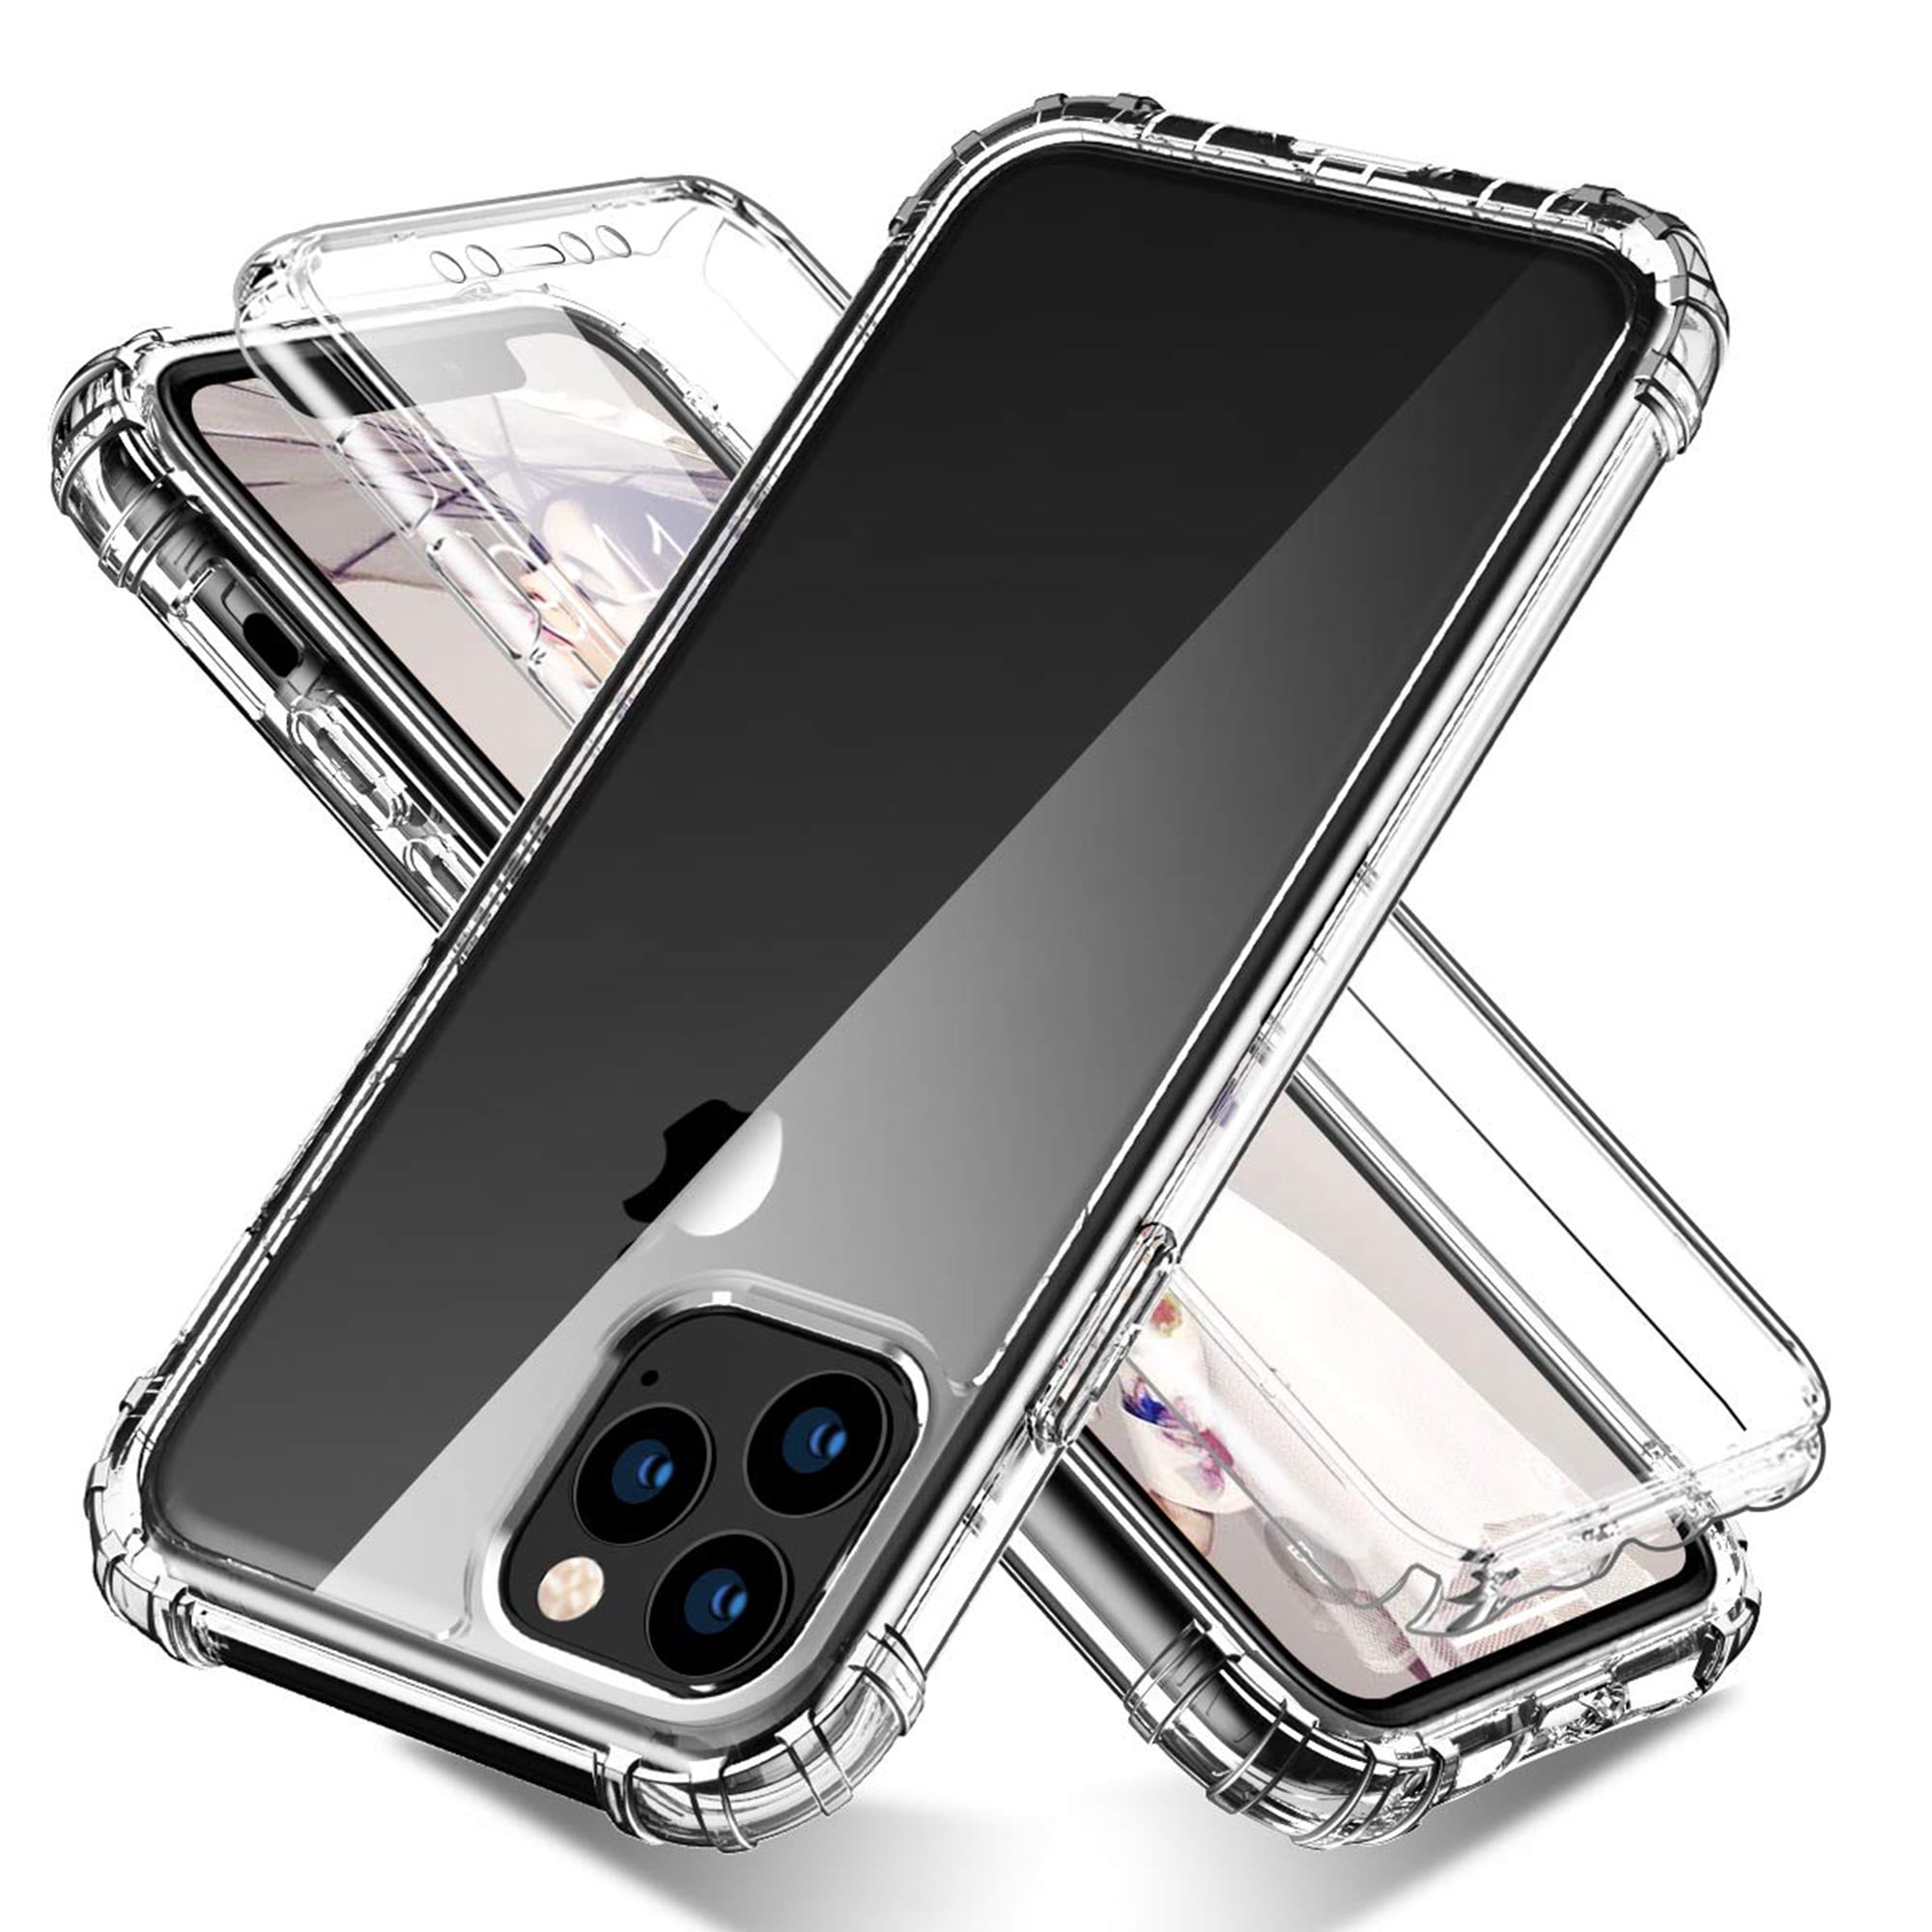 iPhone 11 Pro Max Clear Case, Dteck Full Body Protection [Built in